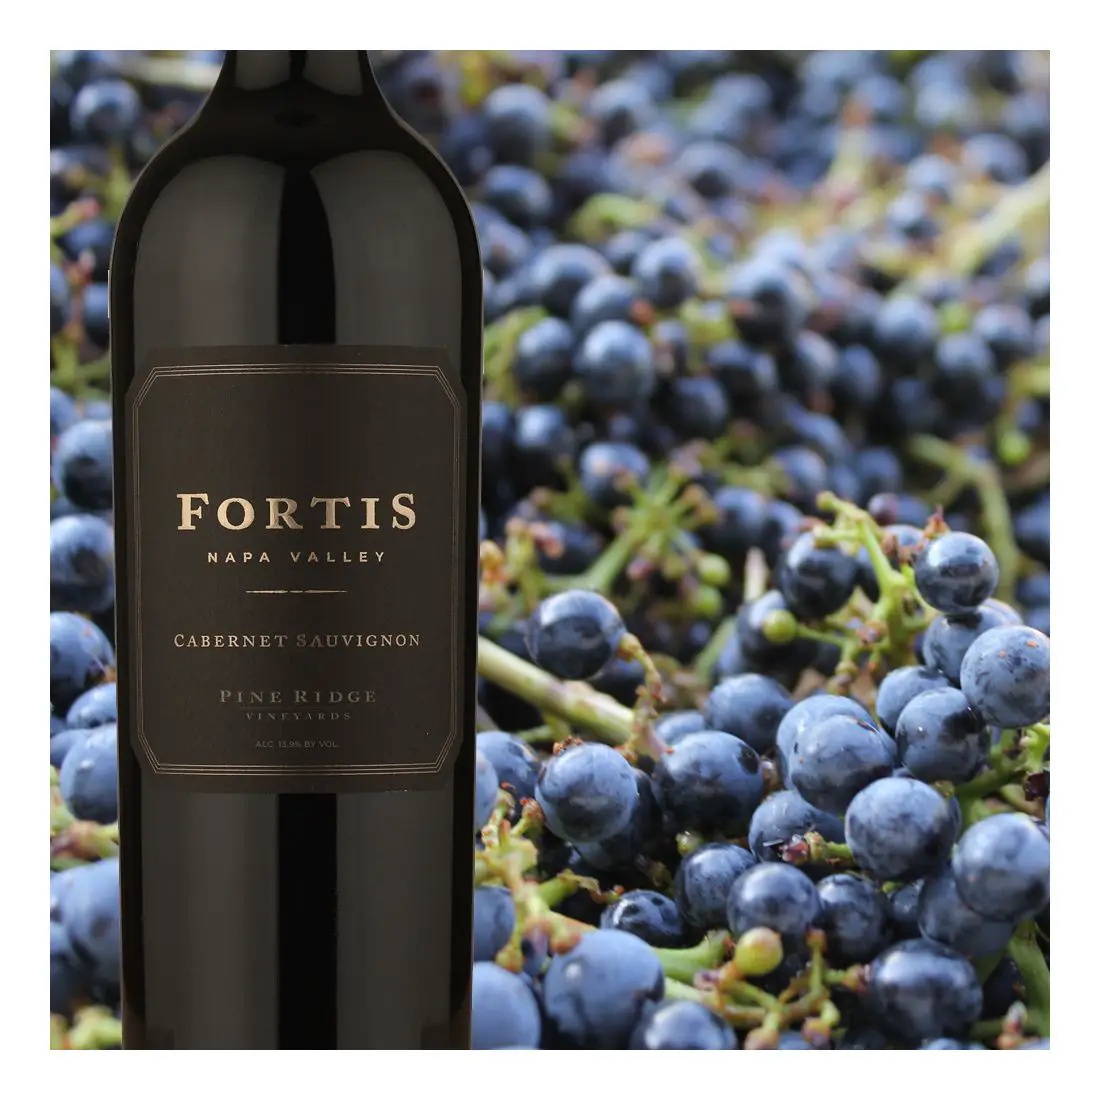 Our 2009 FORTIS Cabernet Sauvignon was rated 94 points and featured as ...